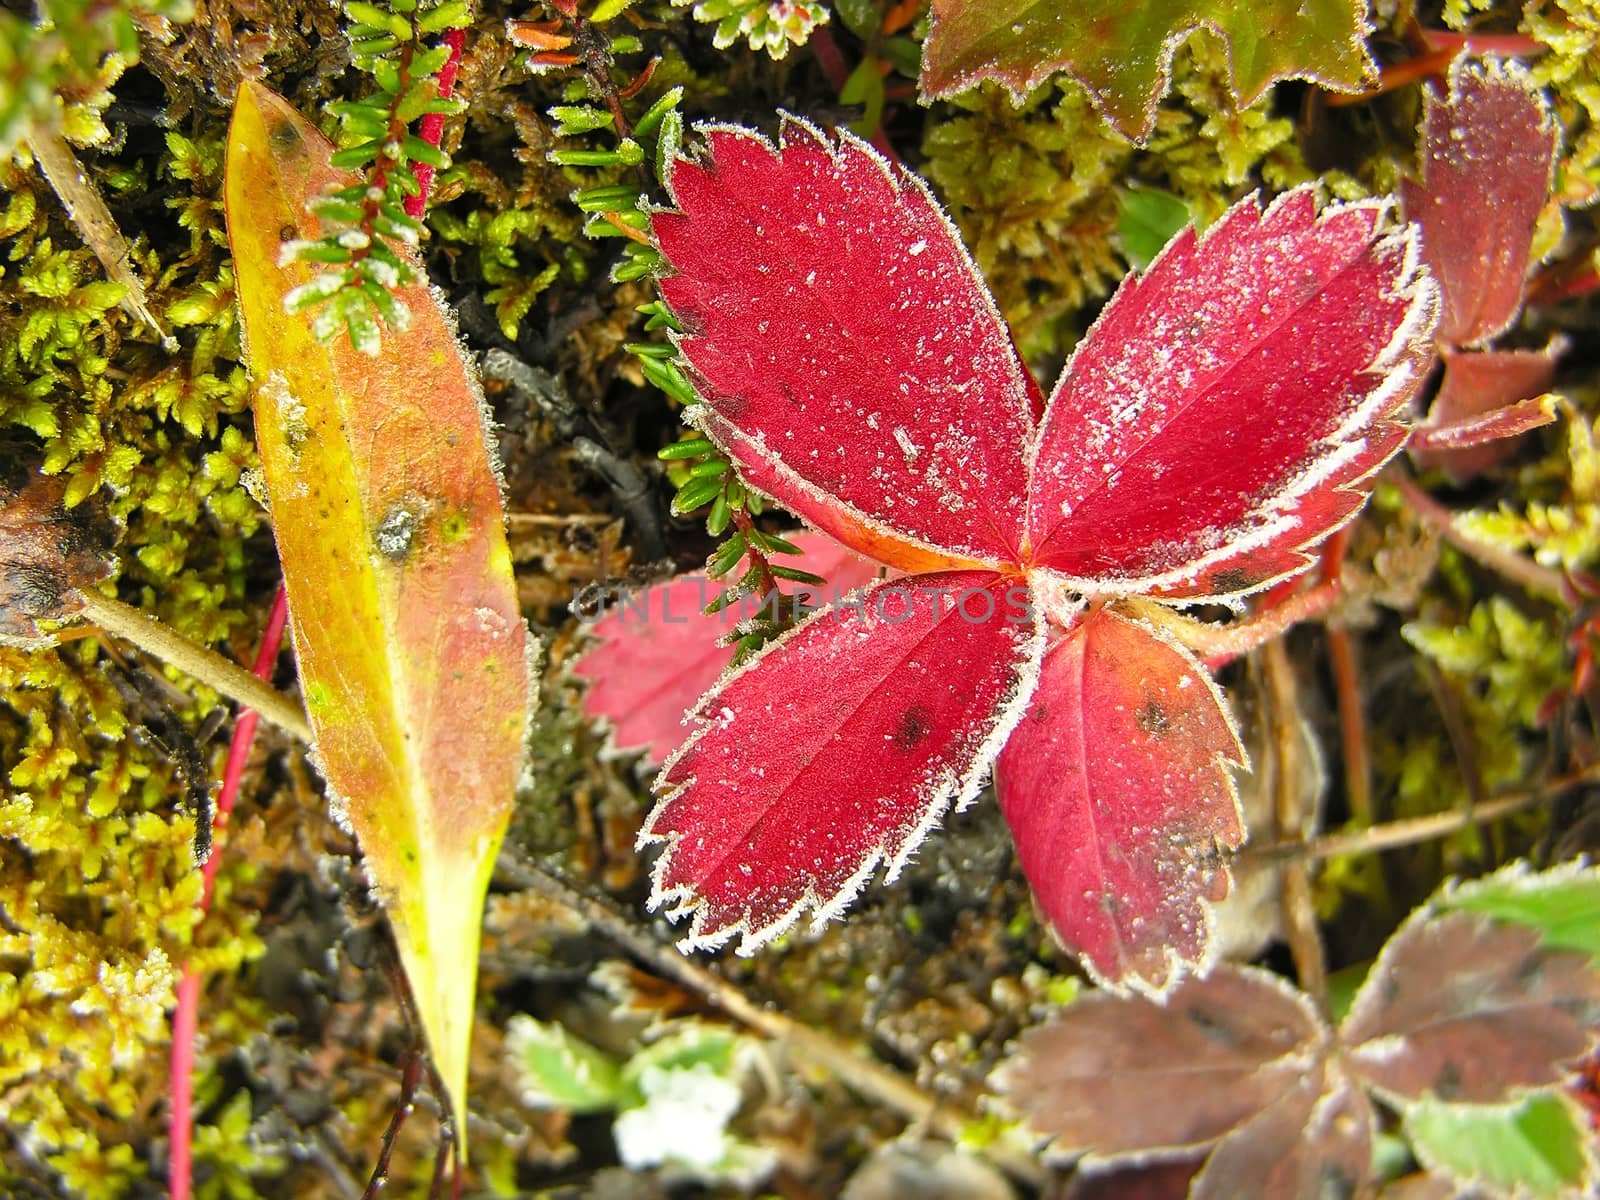 Frosted strawberry leaves, Yoho National Park, Canada by donya_nedomam